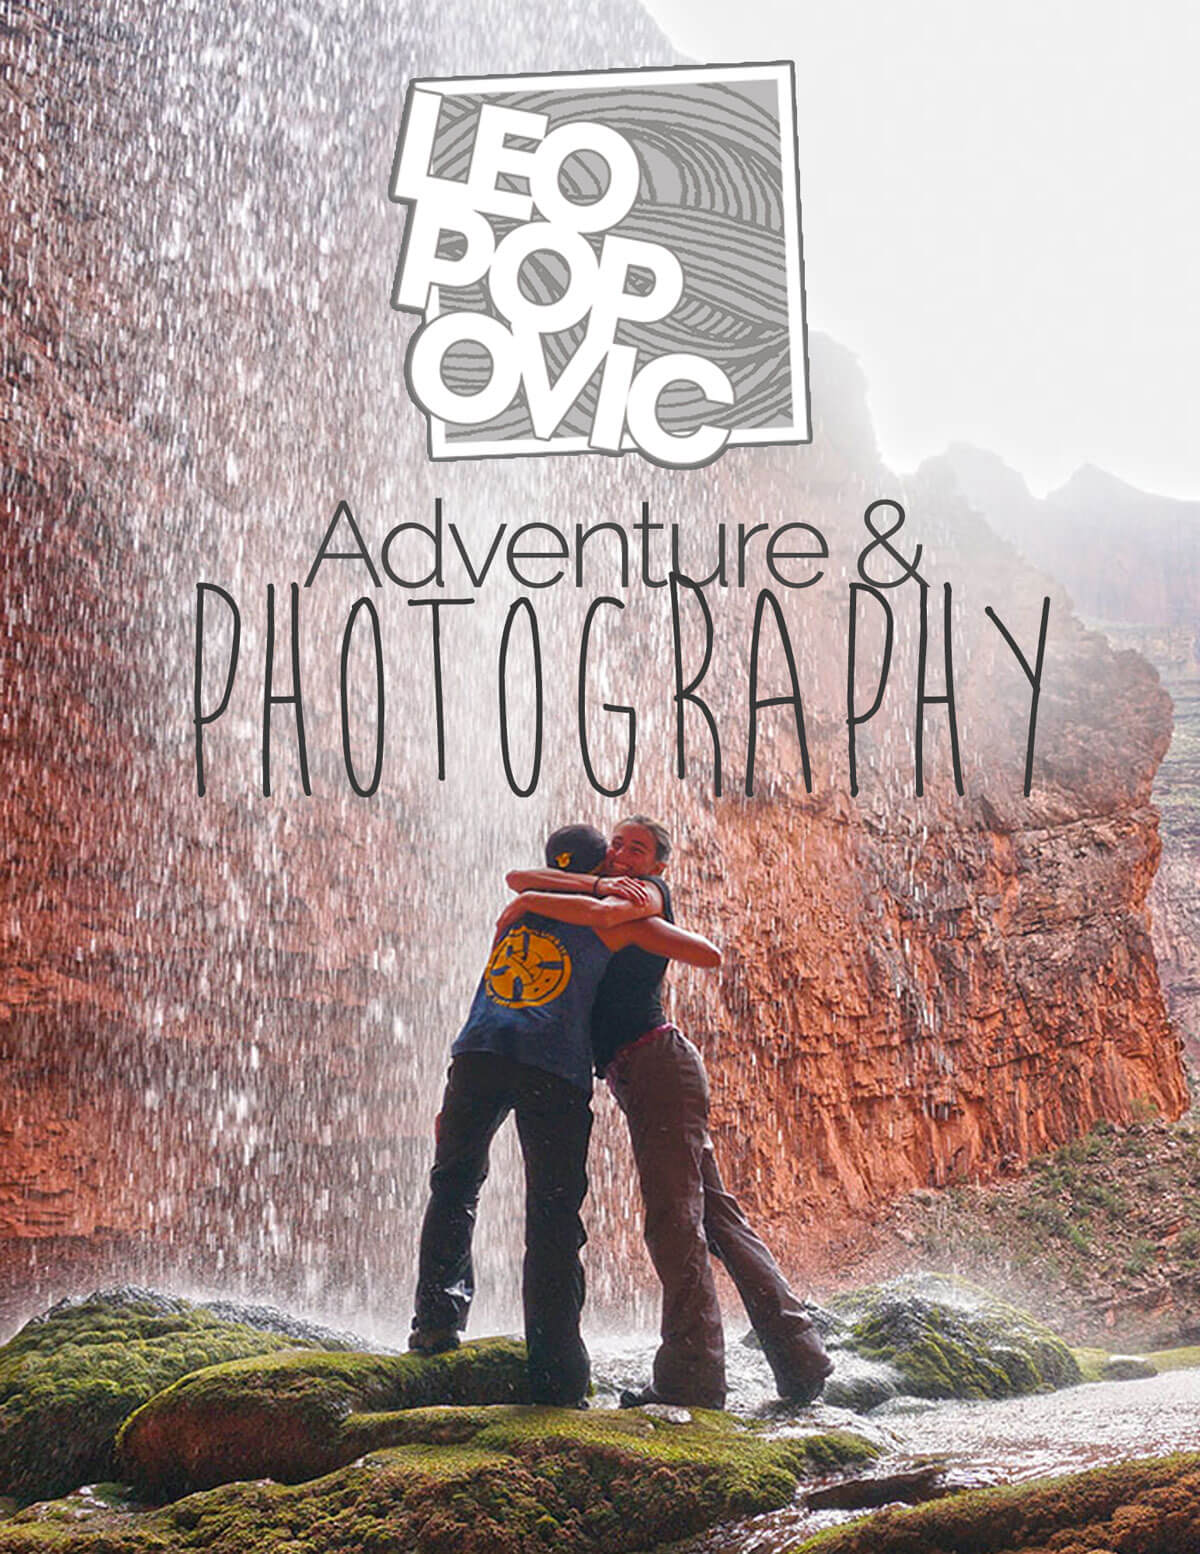 Adventure and Photography